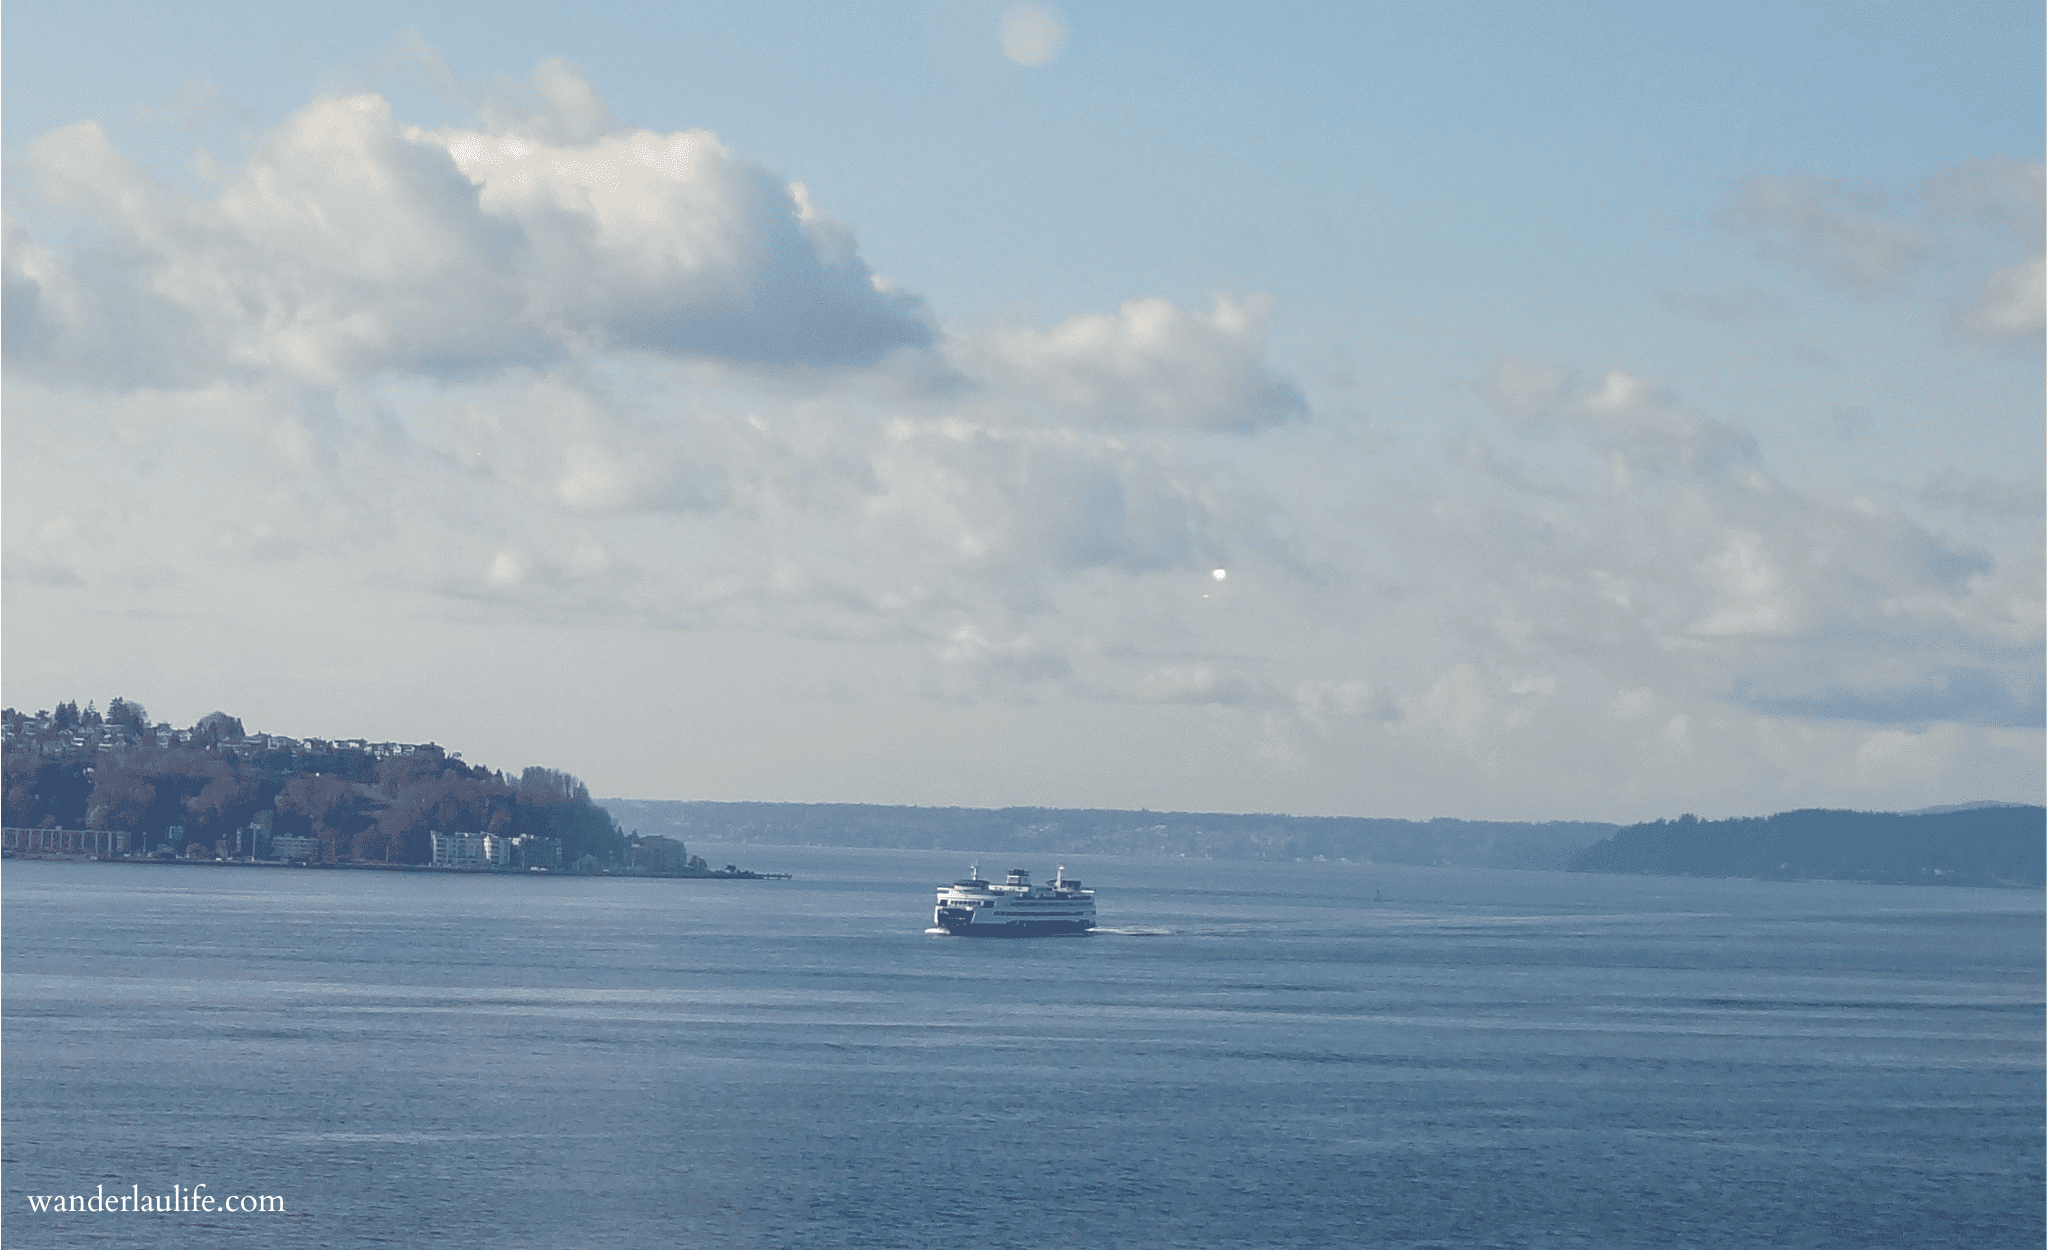 Walkable Seattle and Bainbridge: A ferry returning to Seattle from Bainbridge Island on a partly sunny early evening.